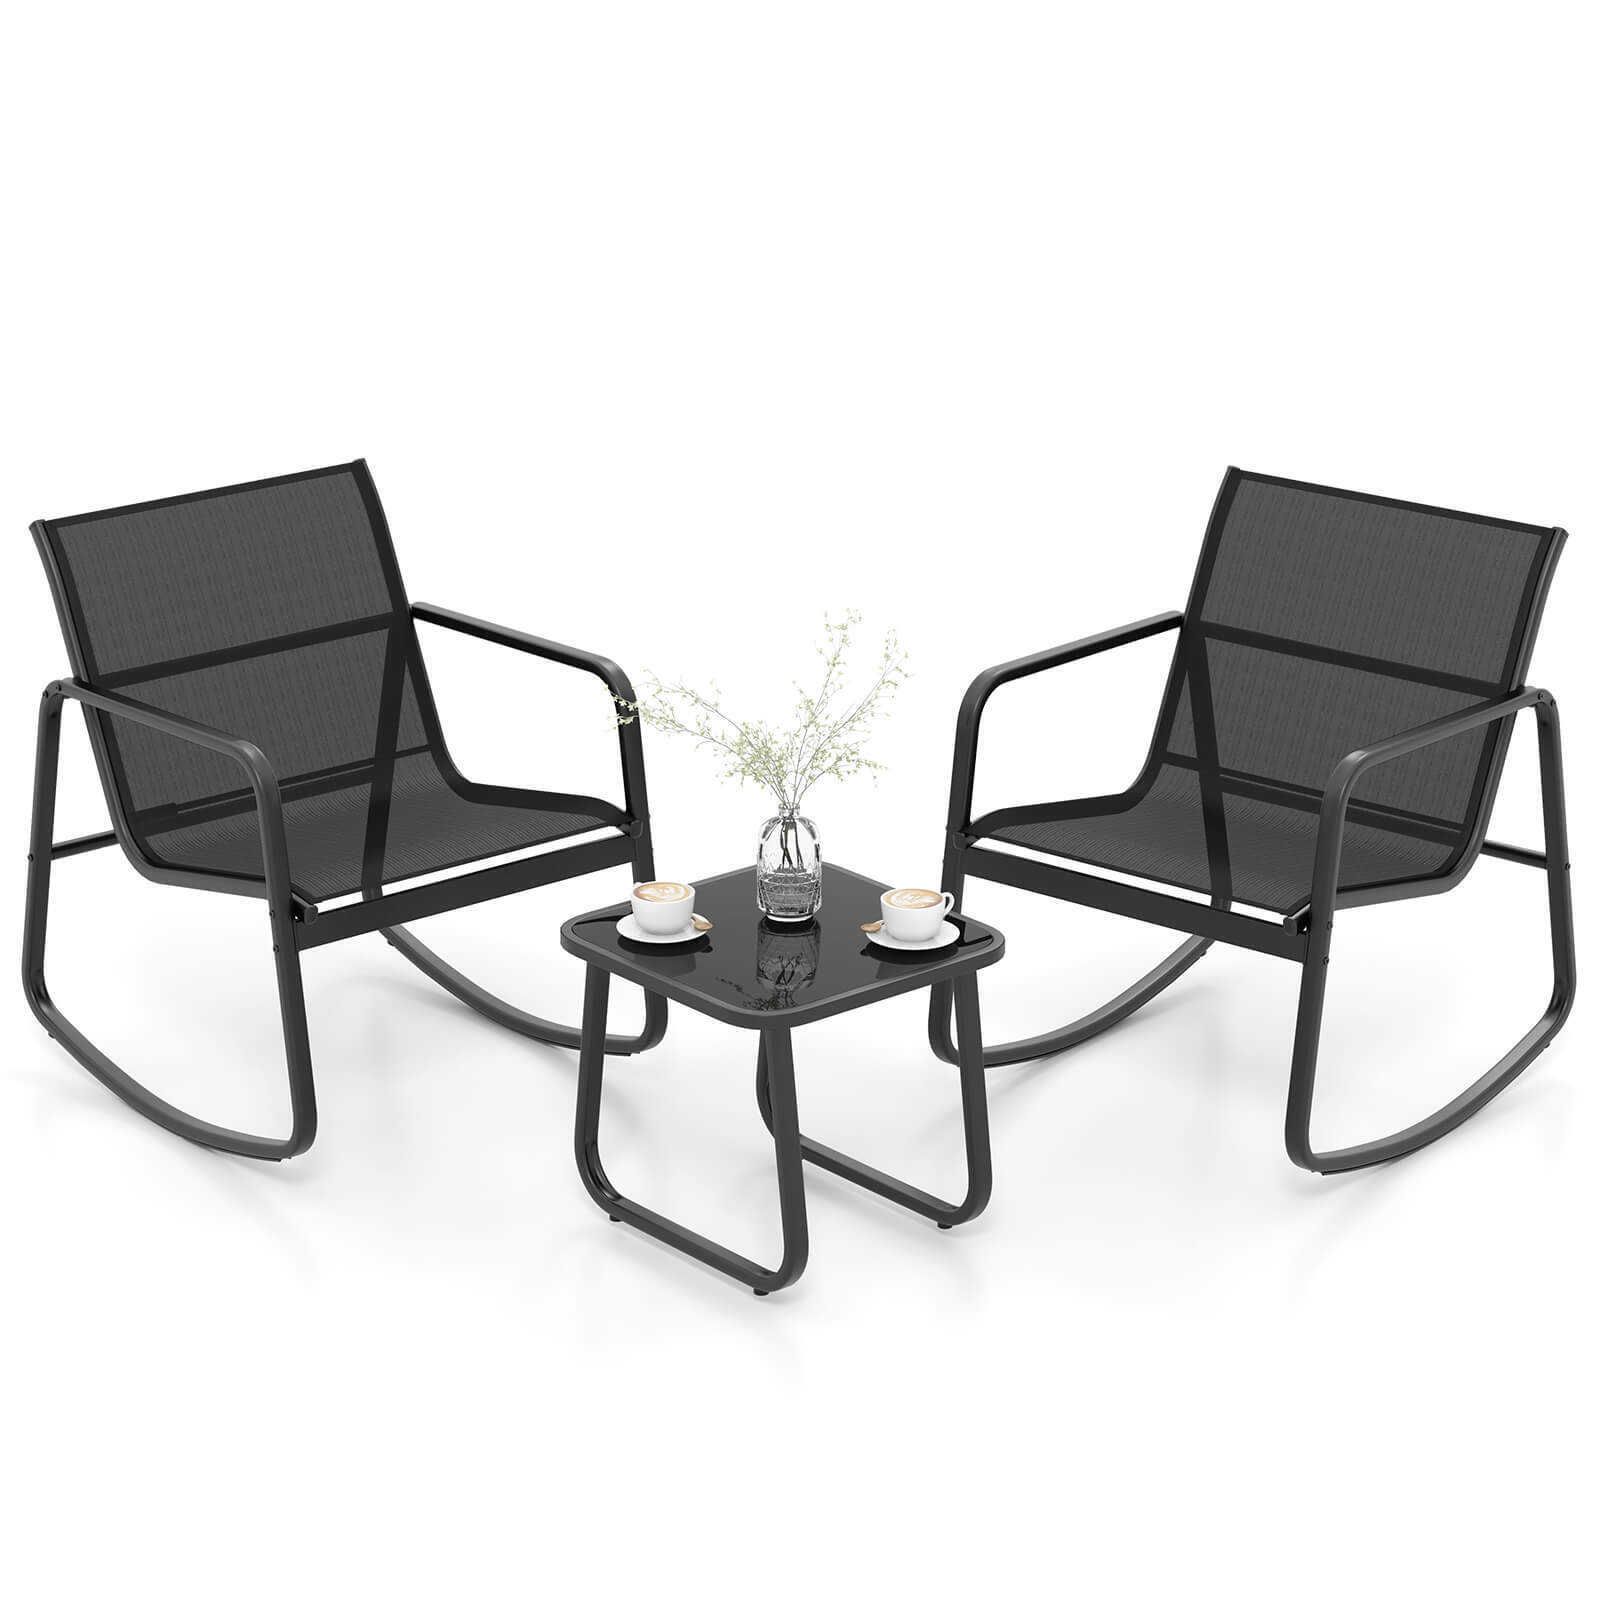 thinkstar 3 Piece Patio Rocking Set 2 Rocking Bistro Chairs & Glass-Top Table For Porch